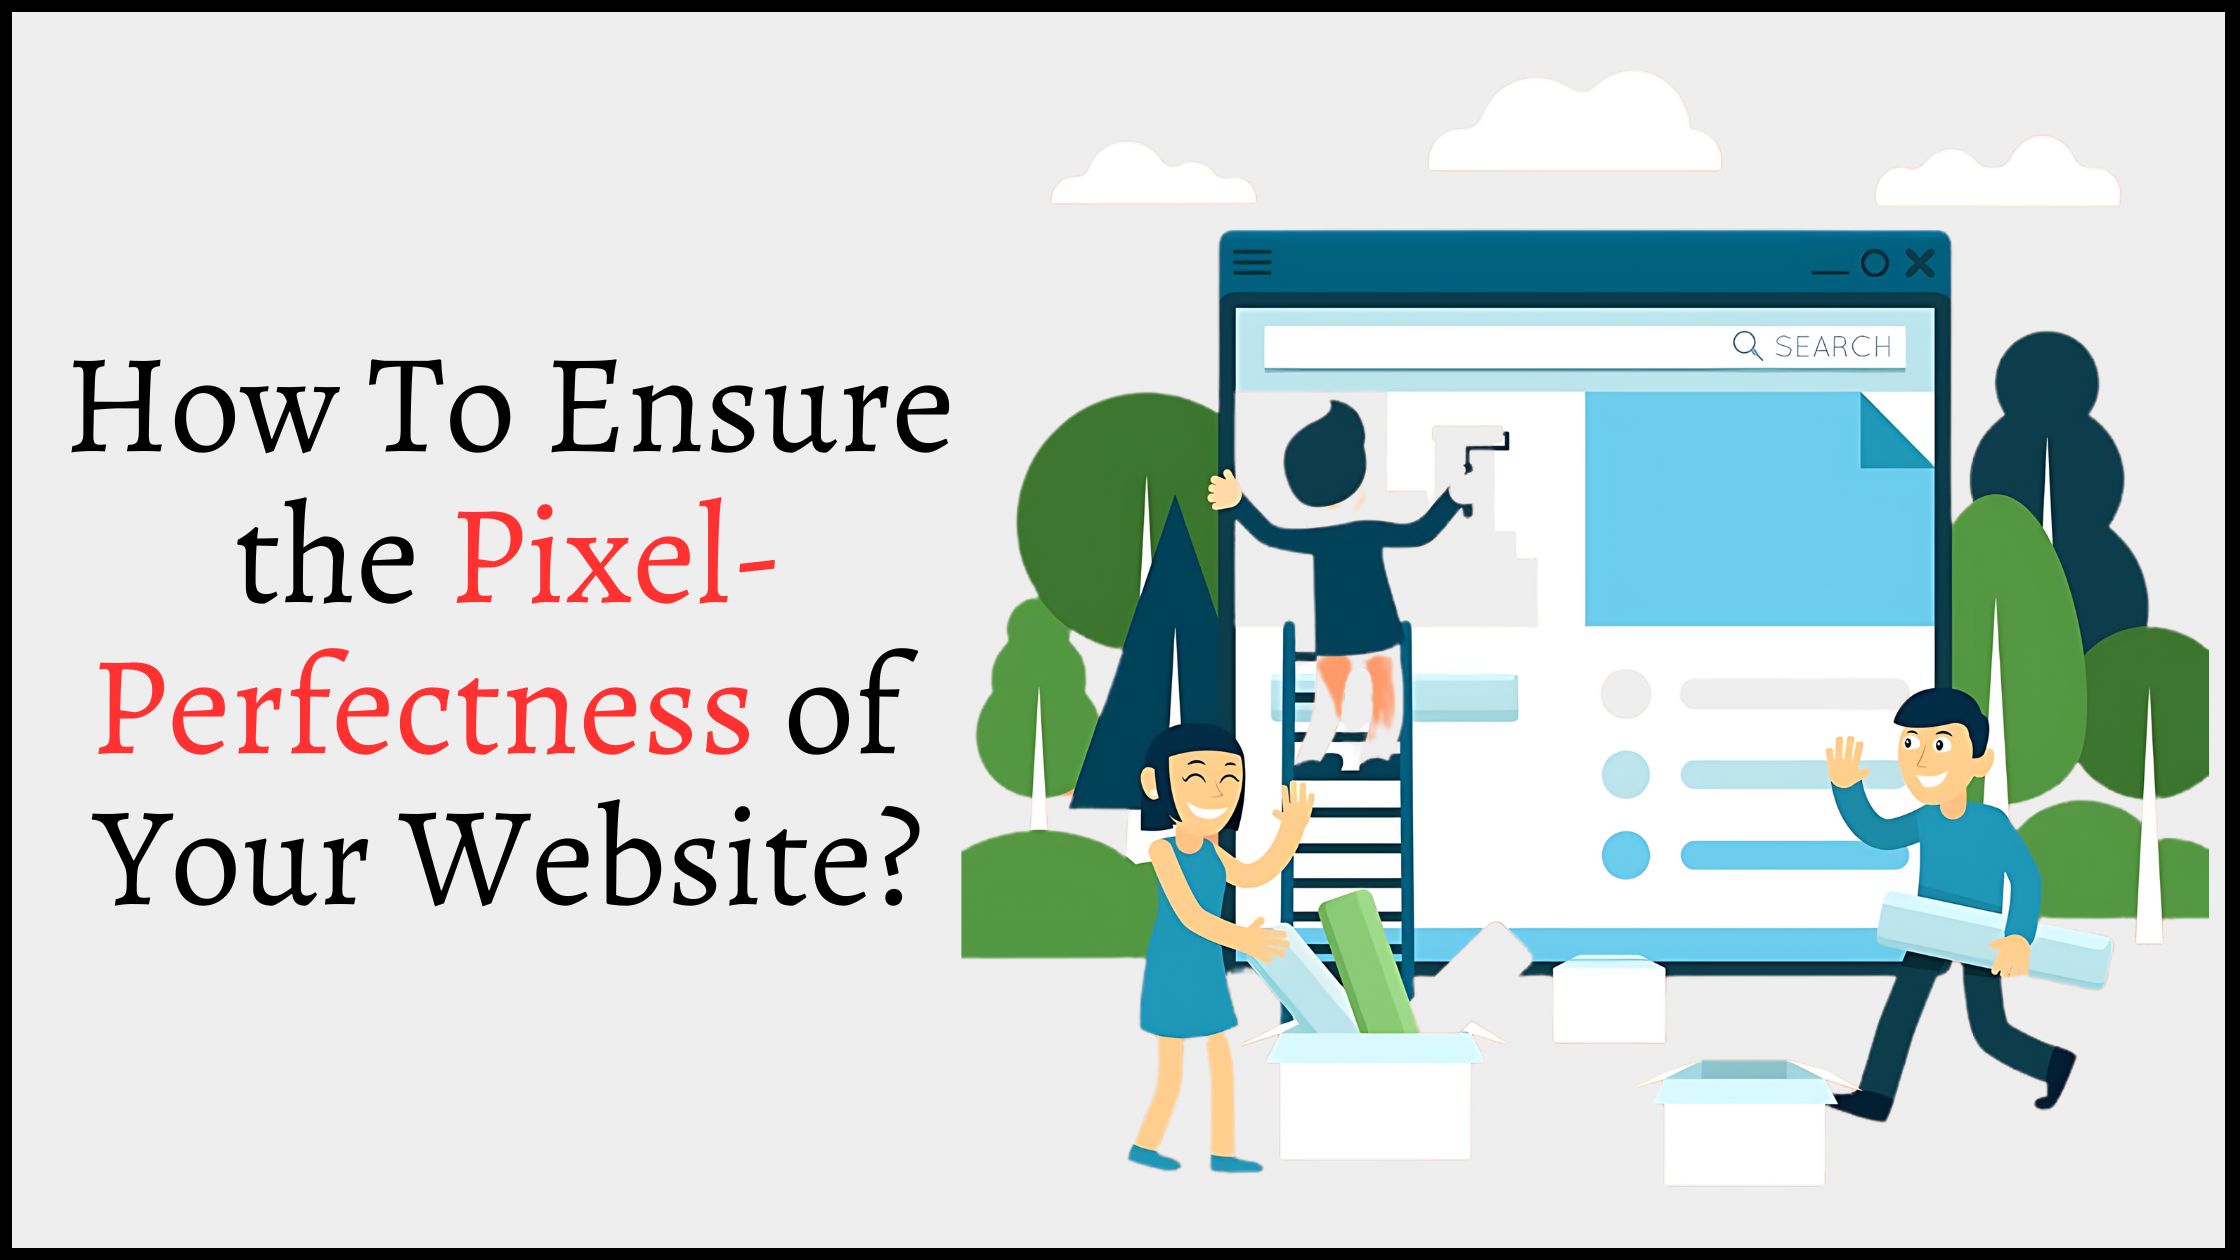 Follow the Right Tips to Ensure a Pixel-Perfect Website